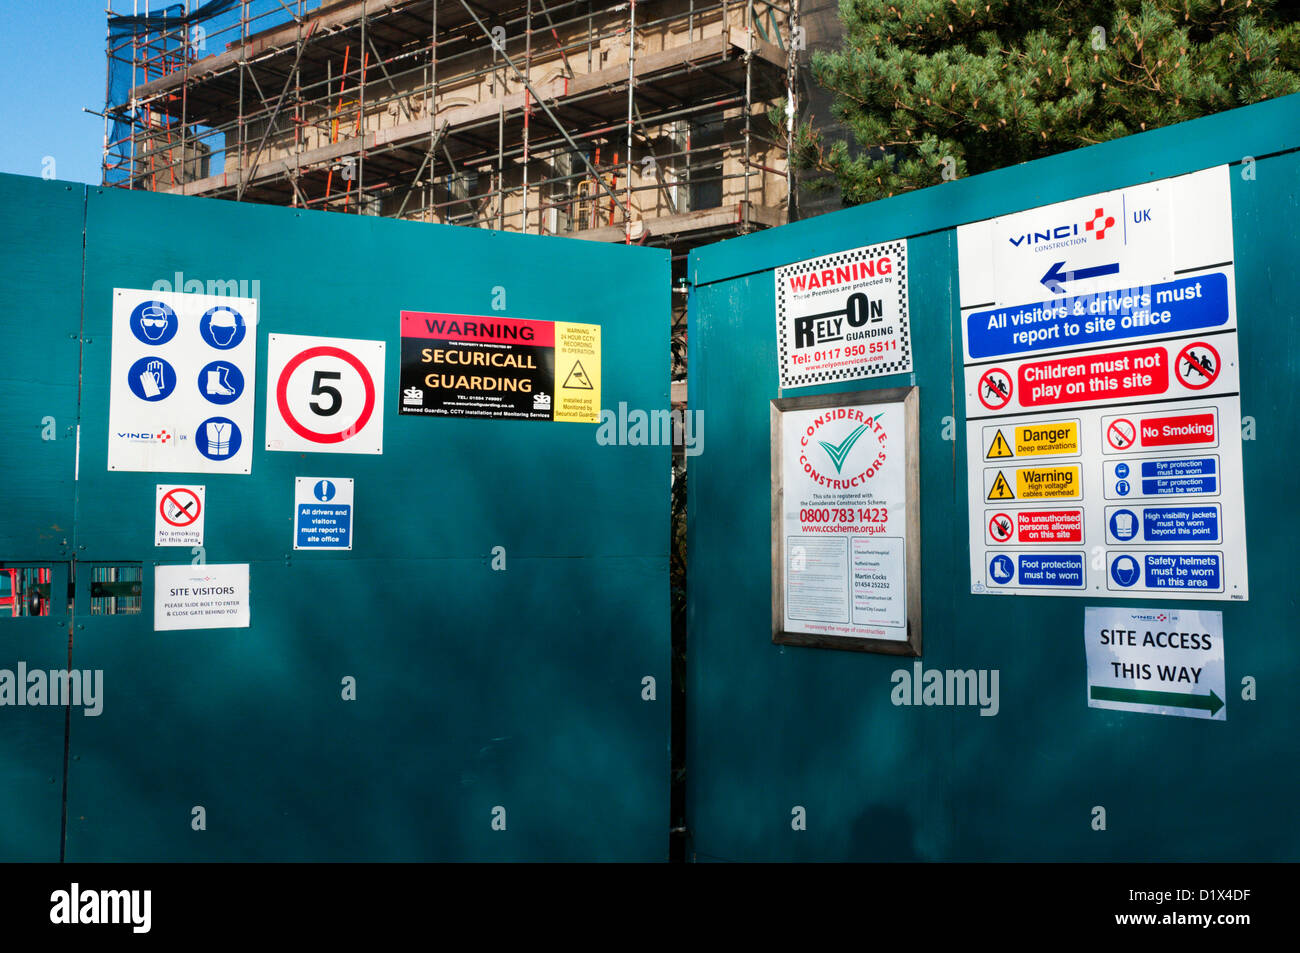 Site safety notices at the entrance to a construction site. Stock Photo